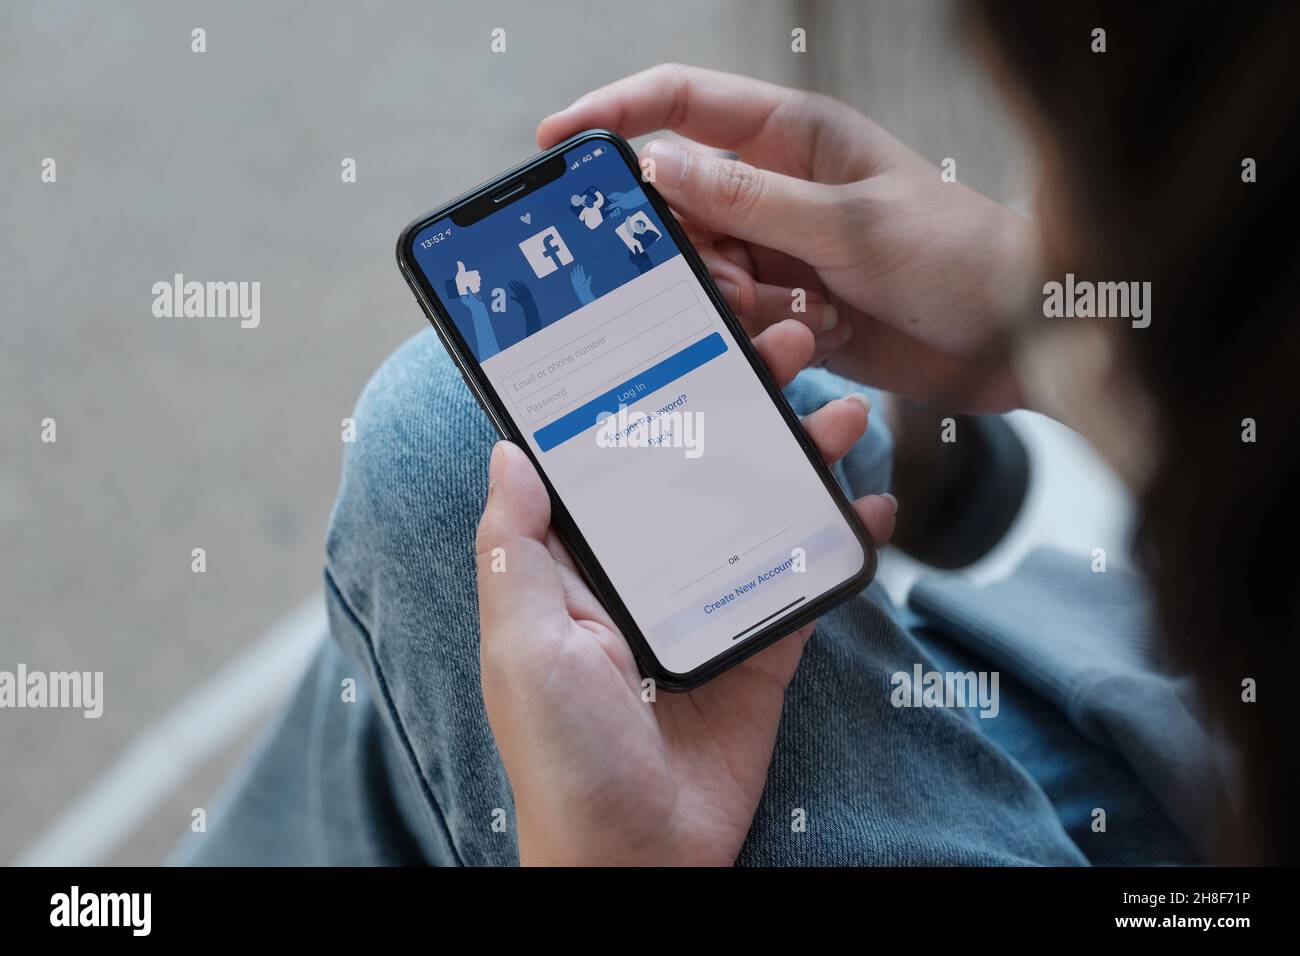 CHIANG MAI, THAILAND - NOV 28, 2021: Facebook social media app logo on log-in, sign-up registration page on mobile app screen on iPhone Xs in person's Stock Photo